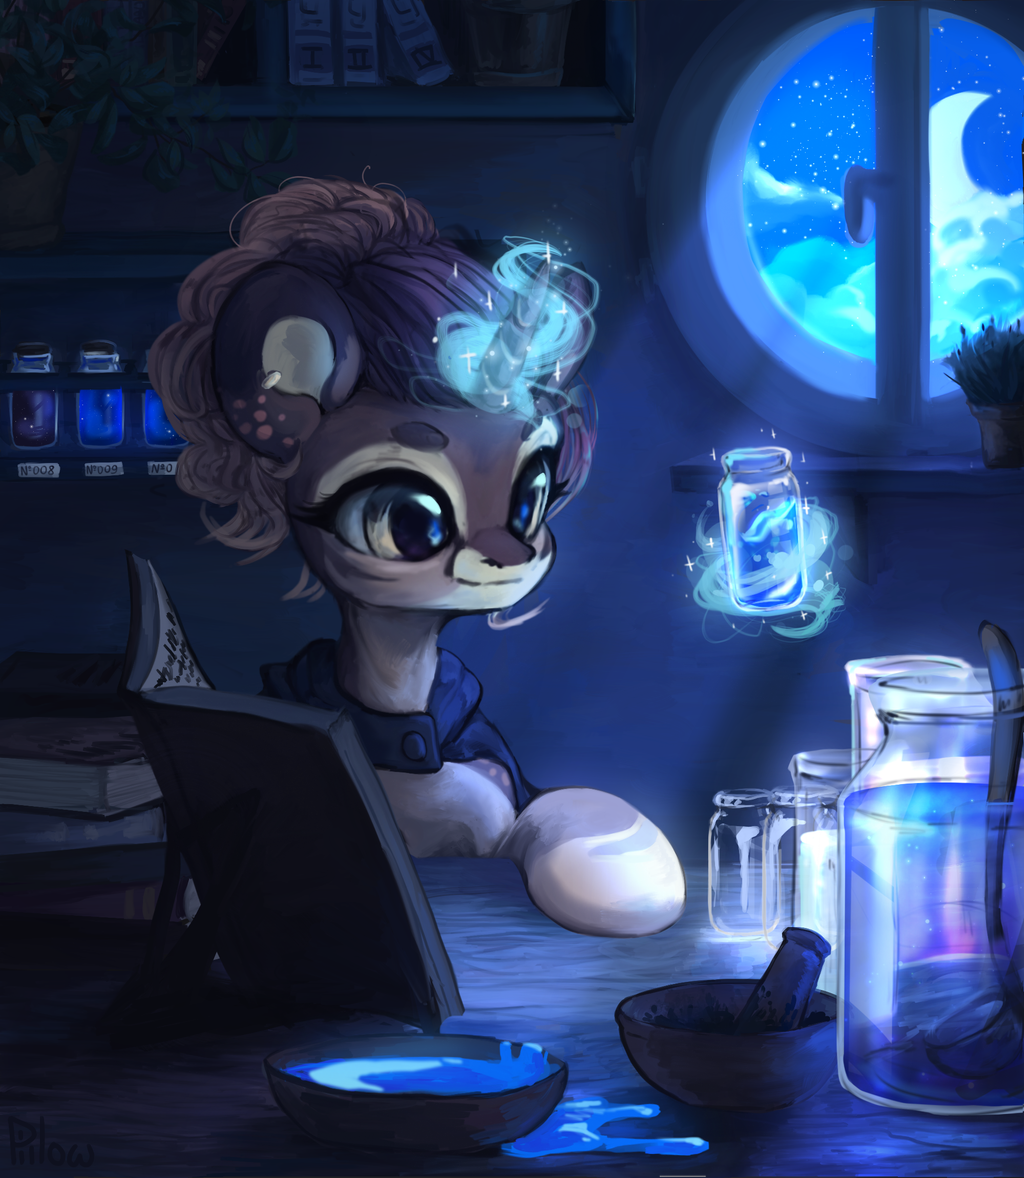 Creating dreams - My little pony, Original character, Graypillow